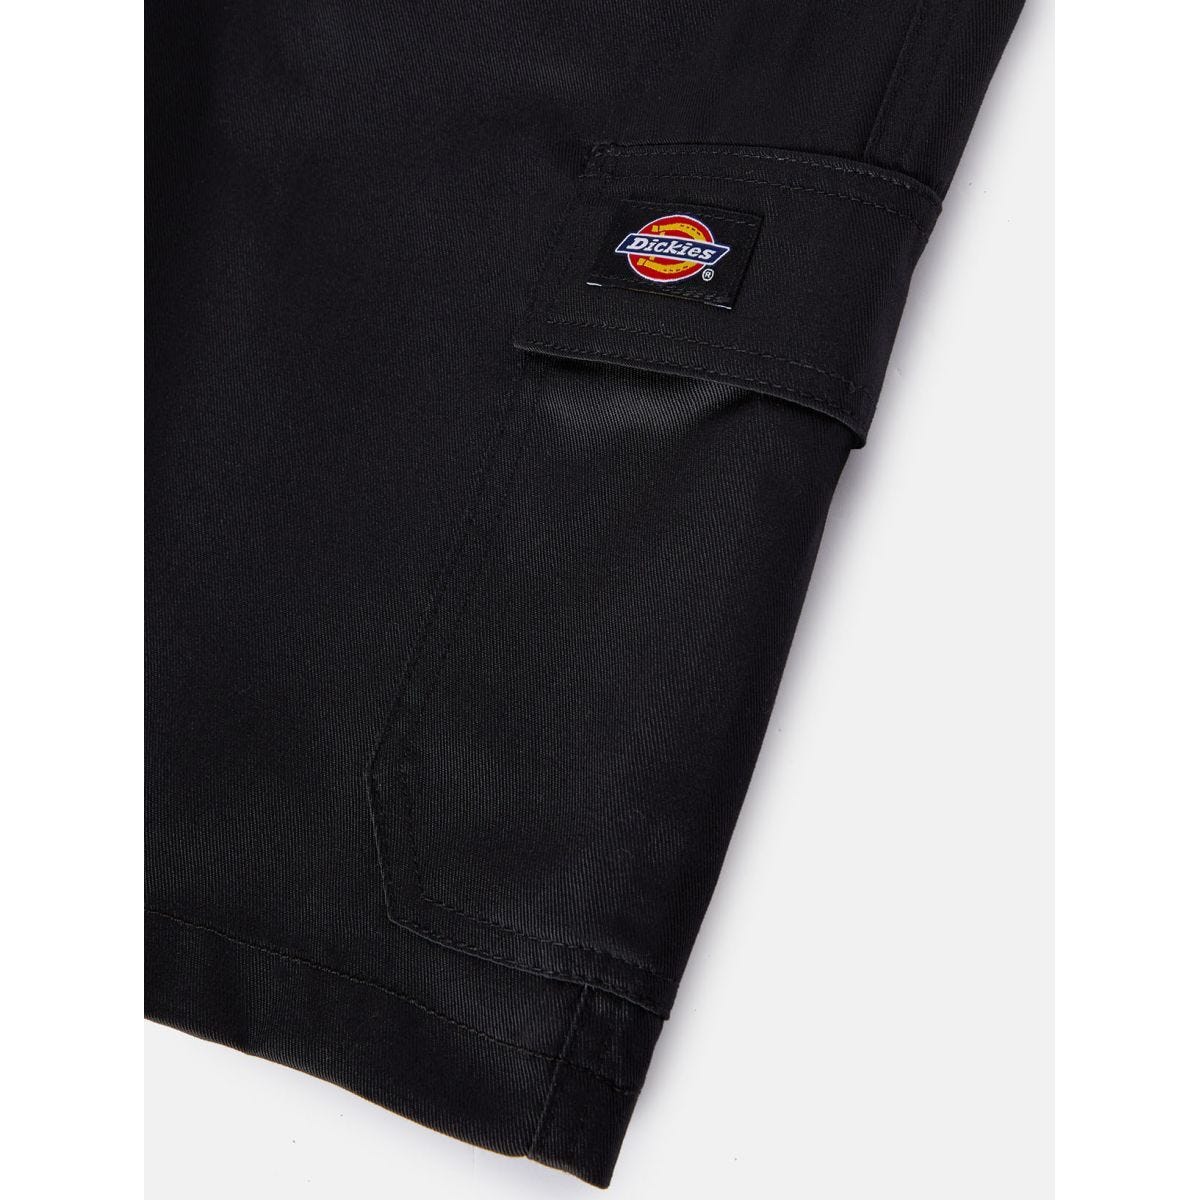 Short Everyday Noir - Dickies - Taille 40 4